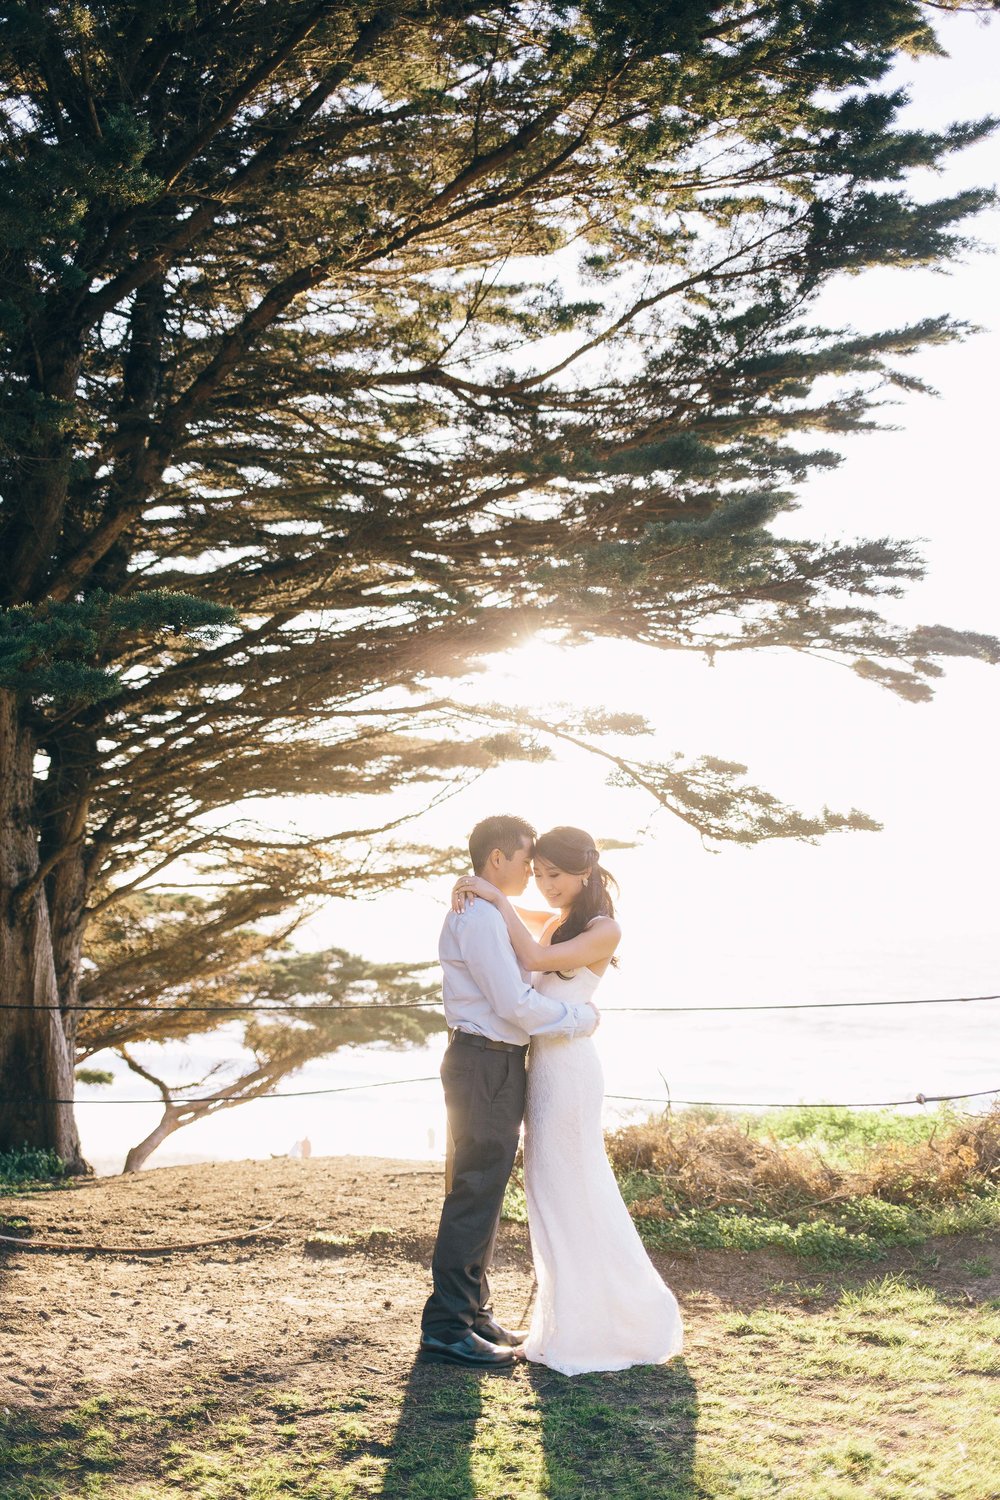 Best Engagement Photo Locations in San Francisco - Baker Beach Engagement Photos by JBJ Pictures (13).jpg